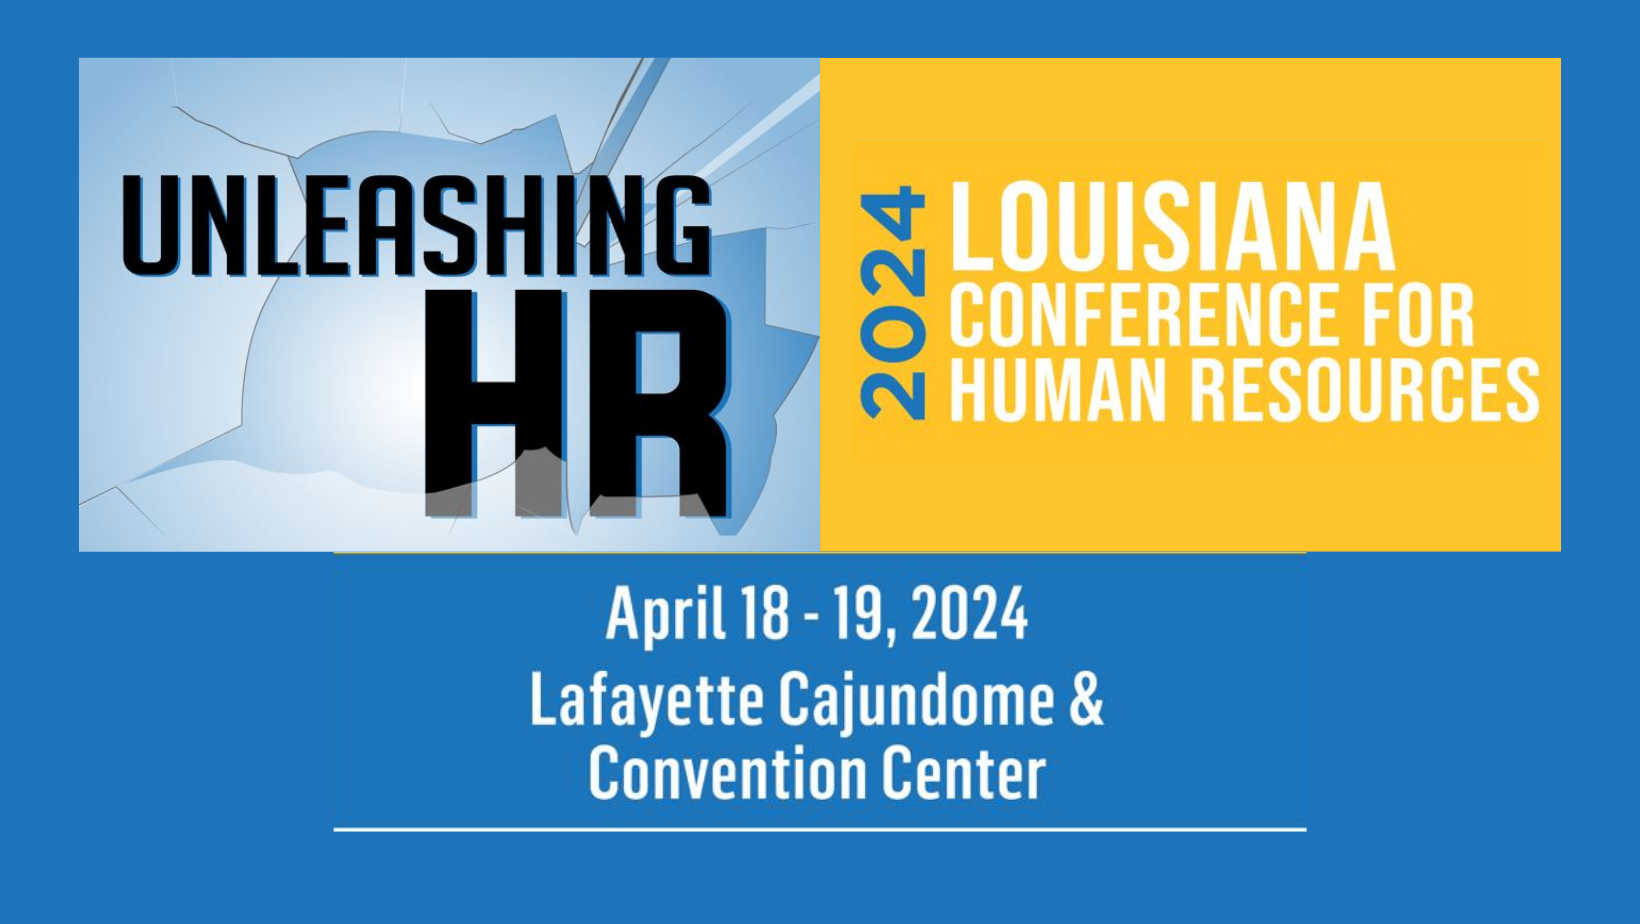 Louisiana SHRM 2024 Conference About